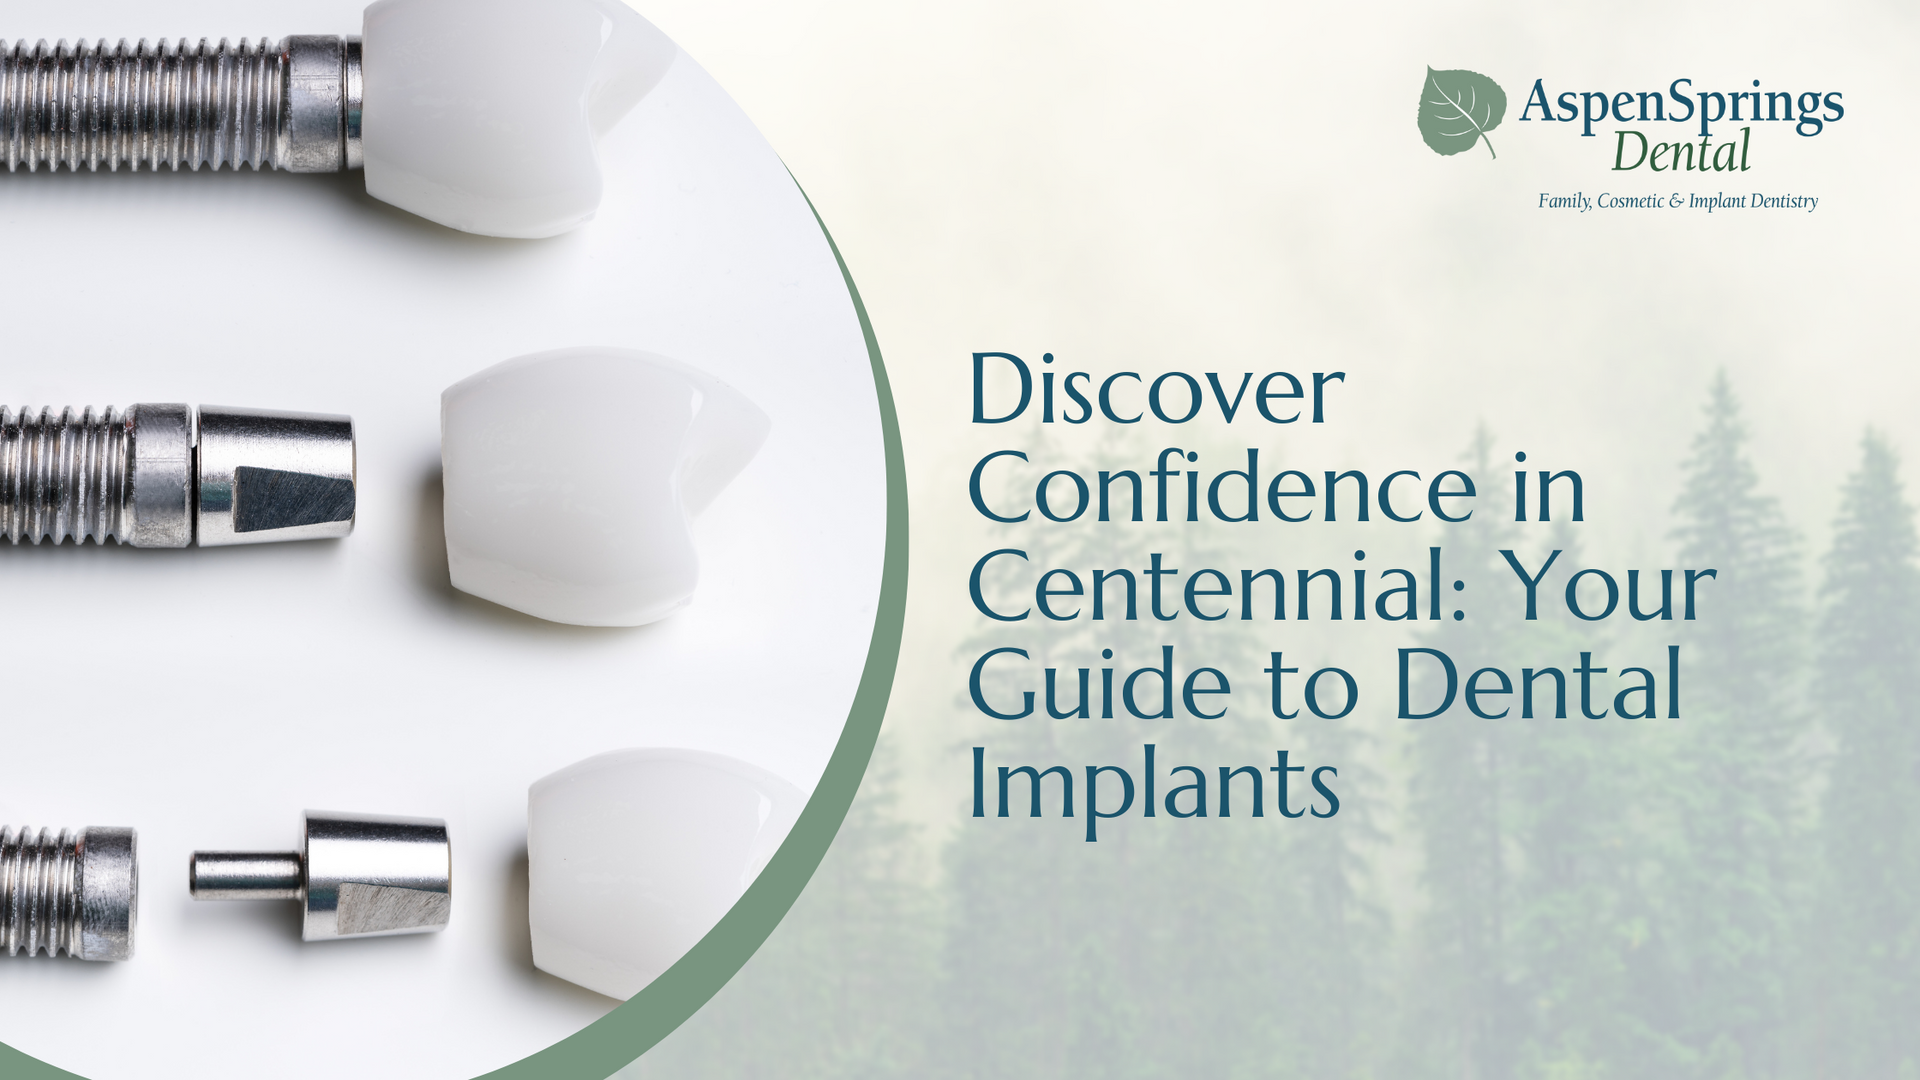 discover confidence in centennial : your guide to dental implants